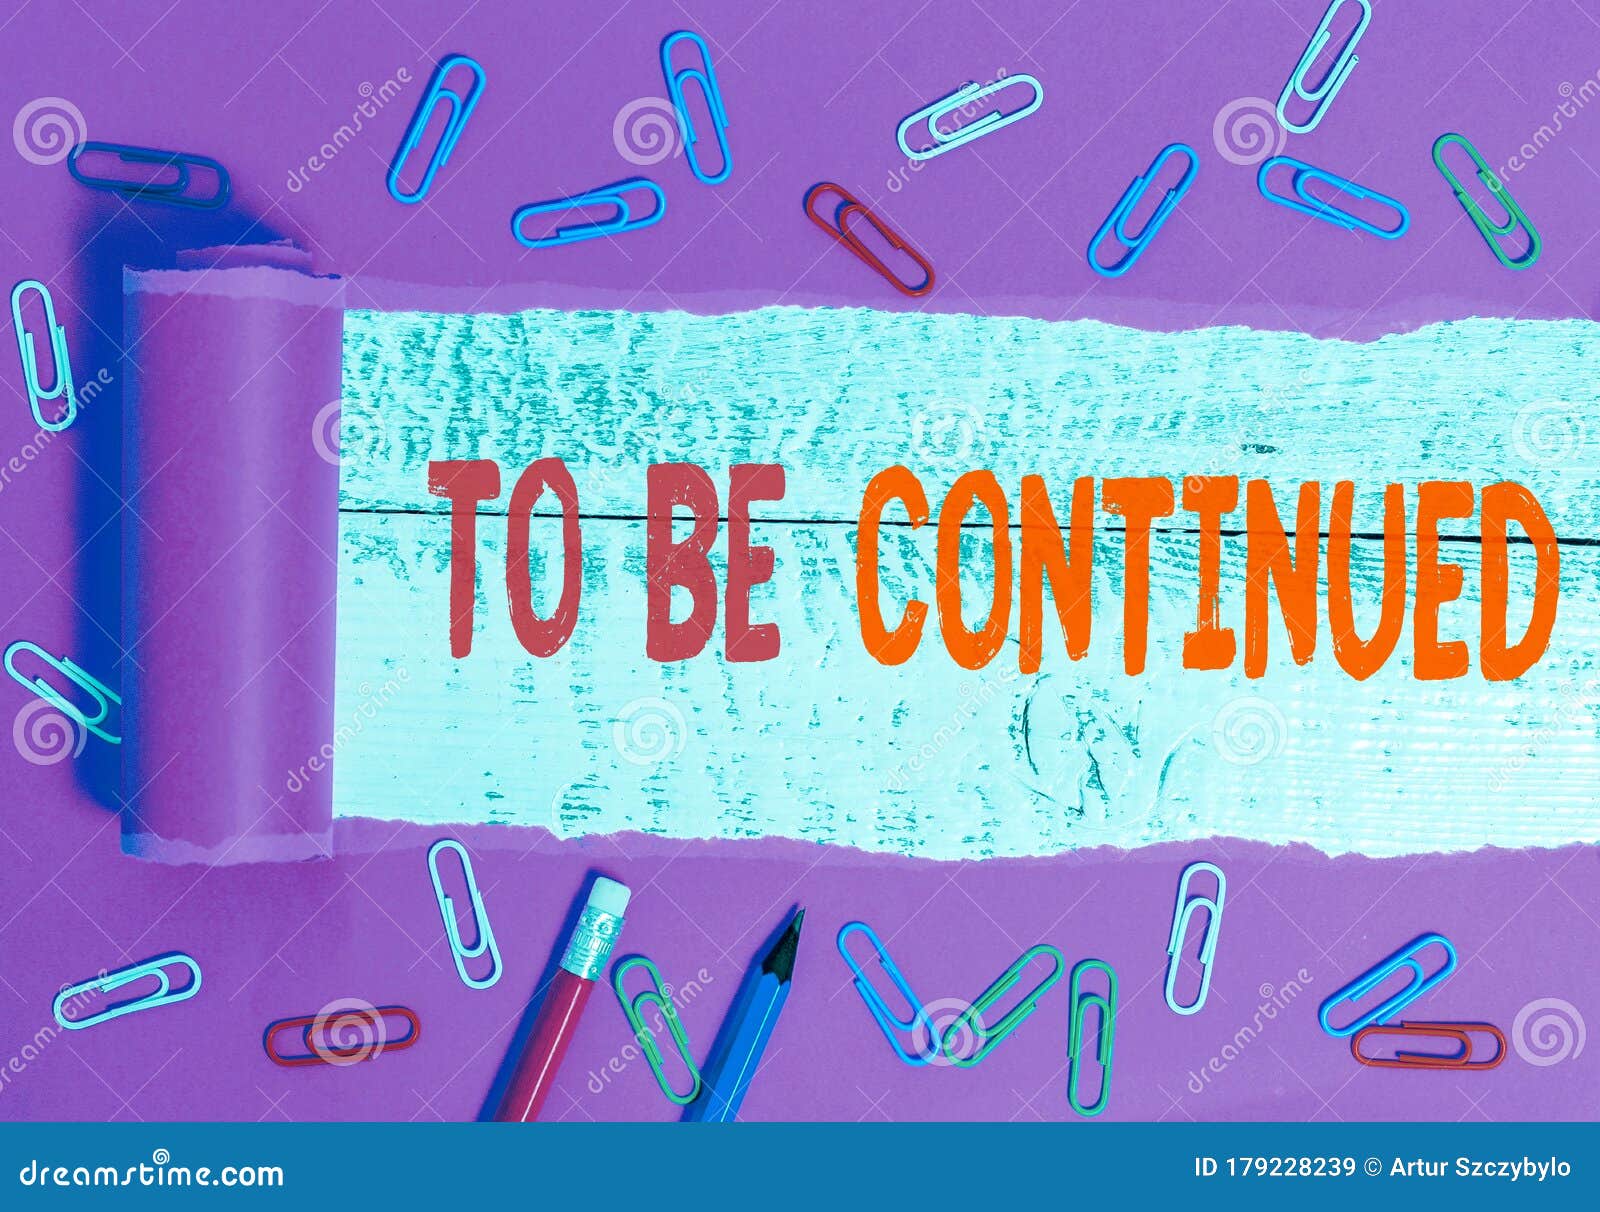 to be continued image